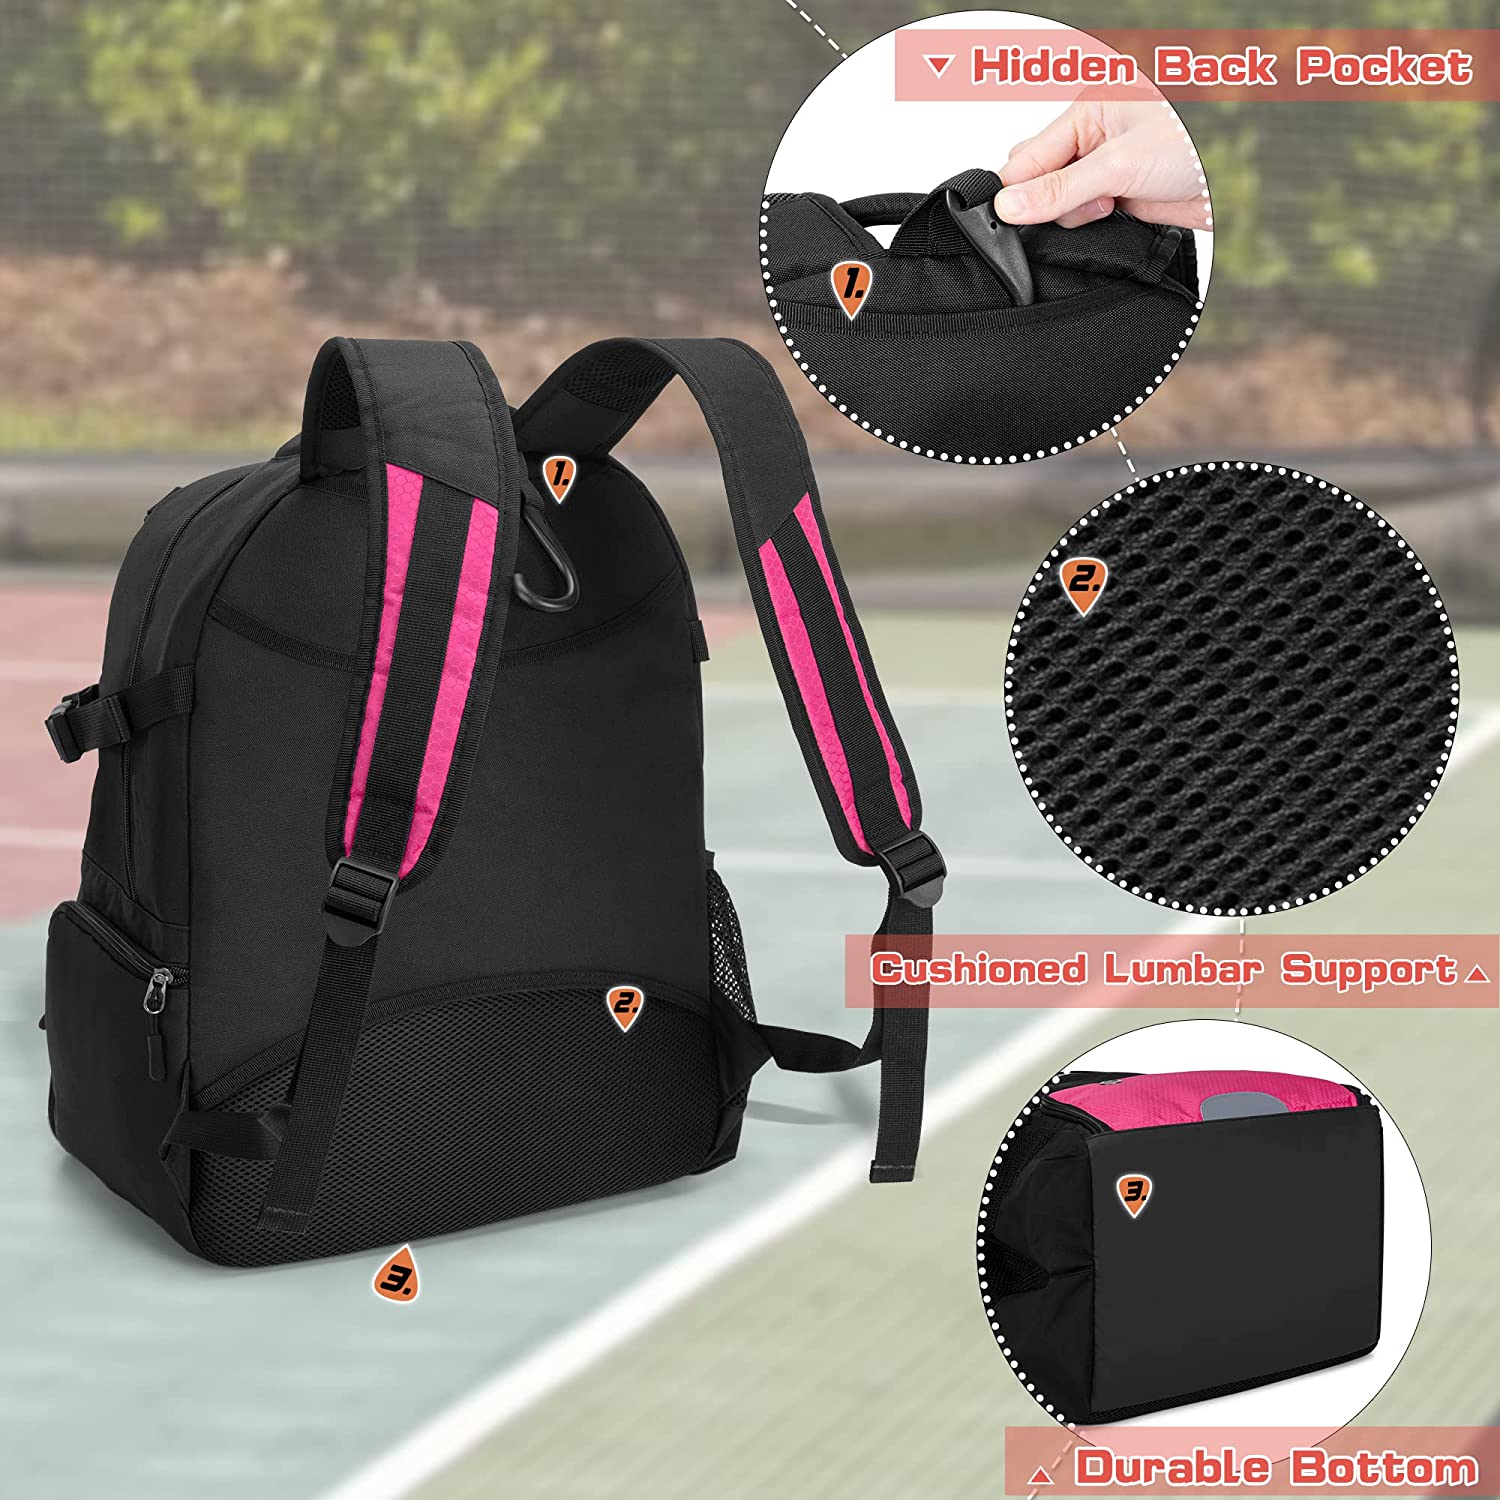 Custom Basketball Equipment Backpack Volleyball Training Bag With External Ball Net and Shoe Compartment for Soccer